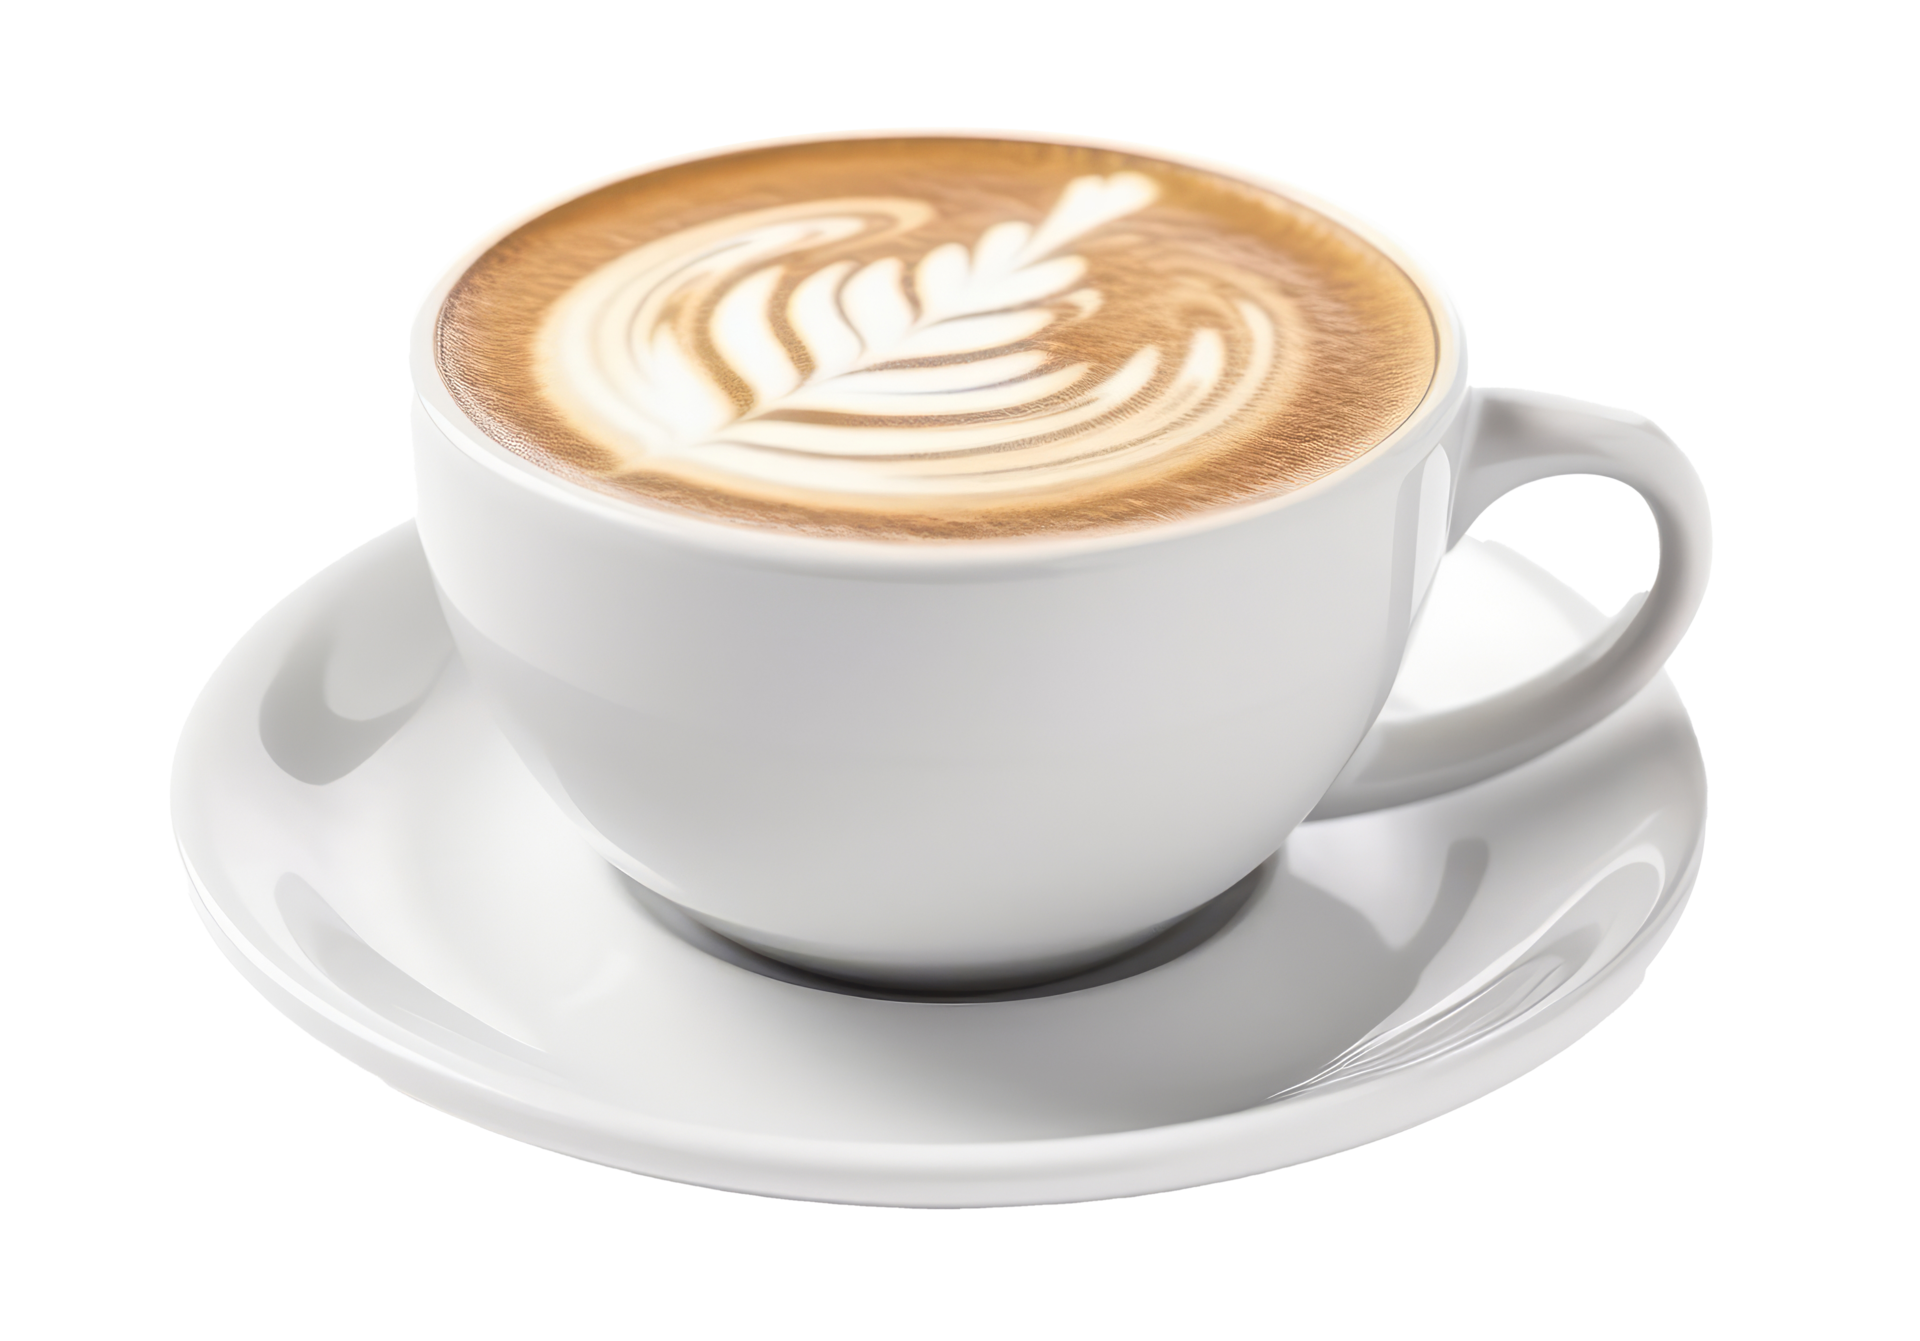 https://static.vecteezy.com/system/resources/previews/023/522/886/original/cappuccino-coffee-cup-cutout-free-png.png